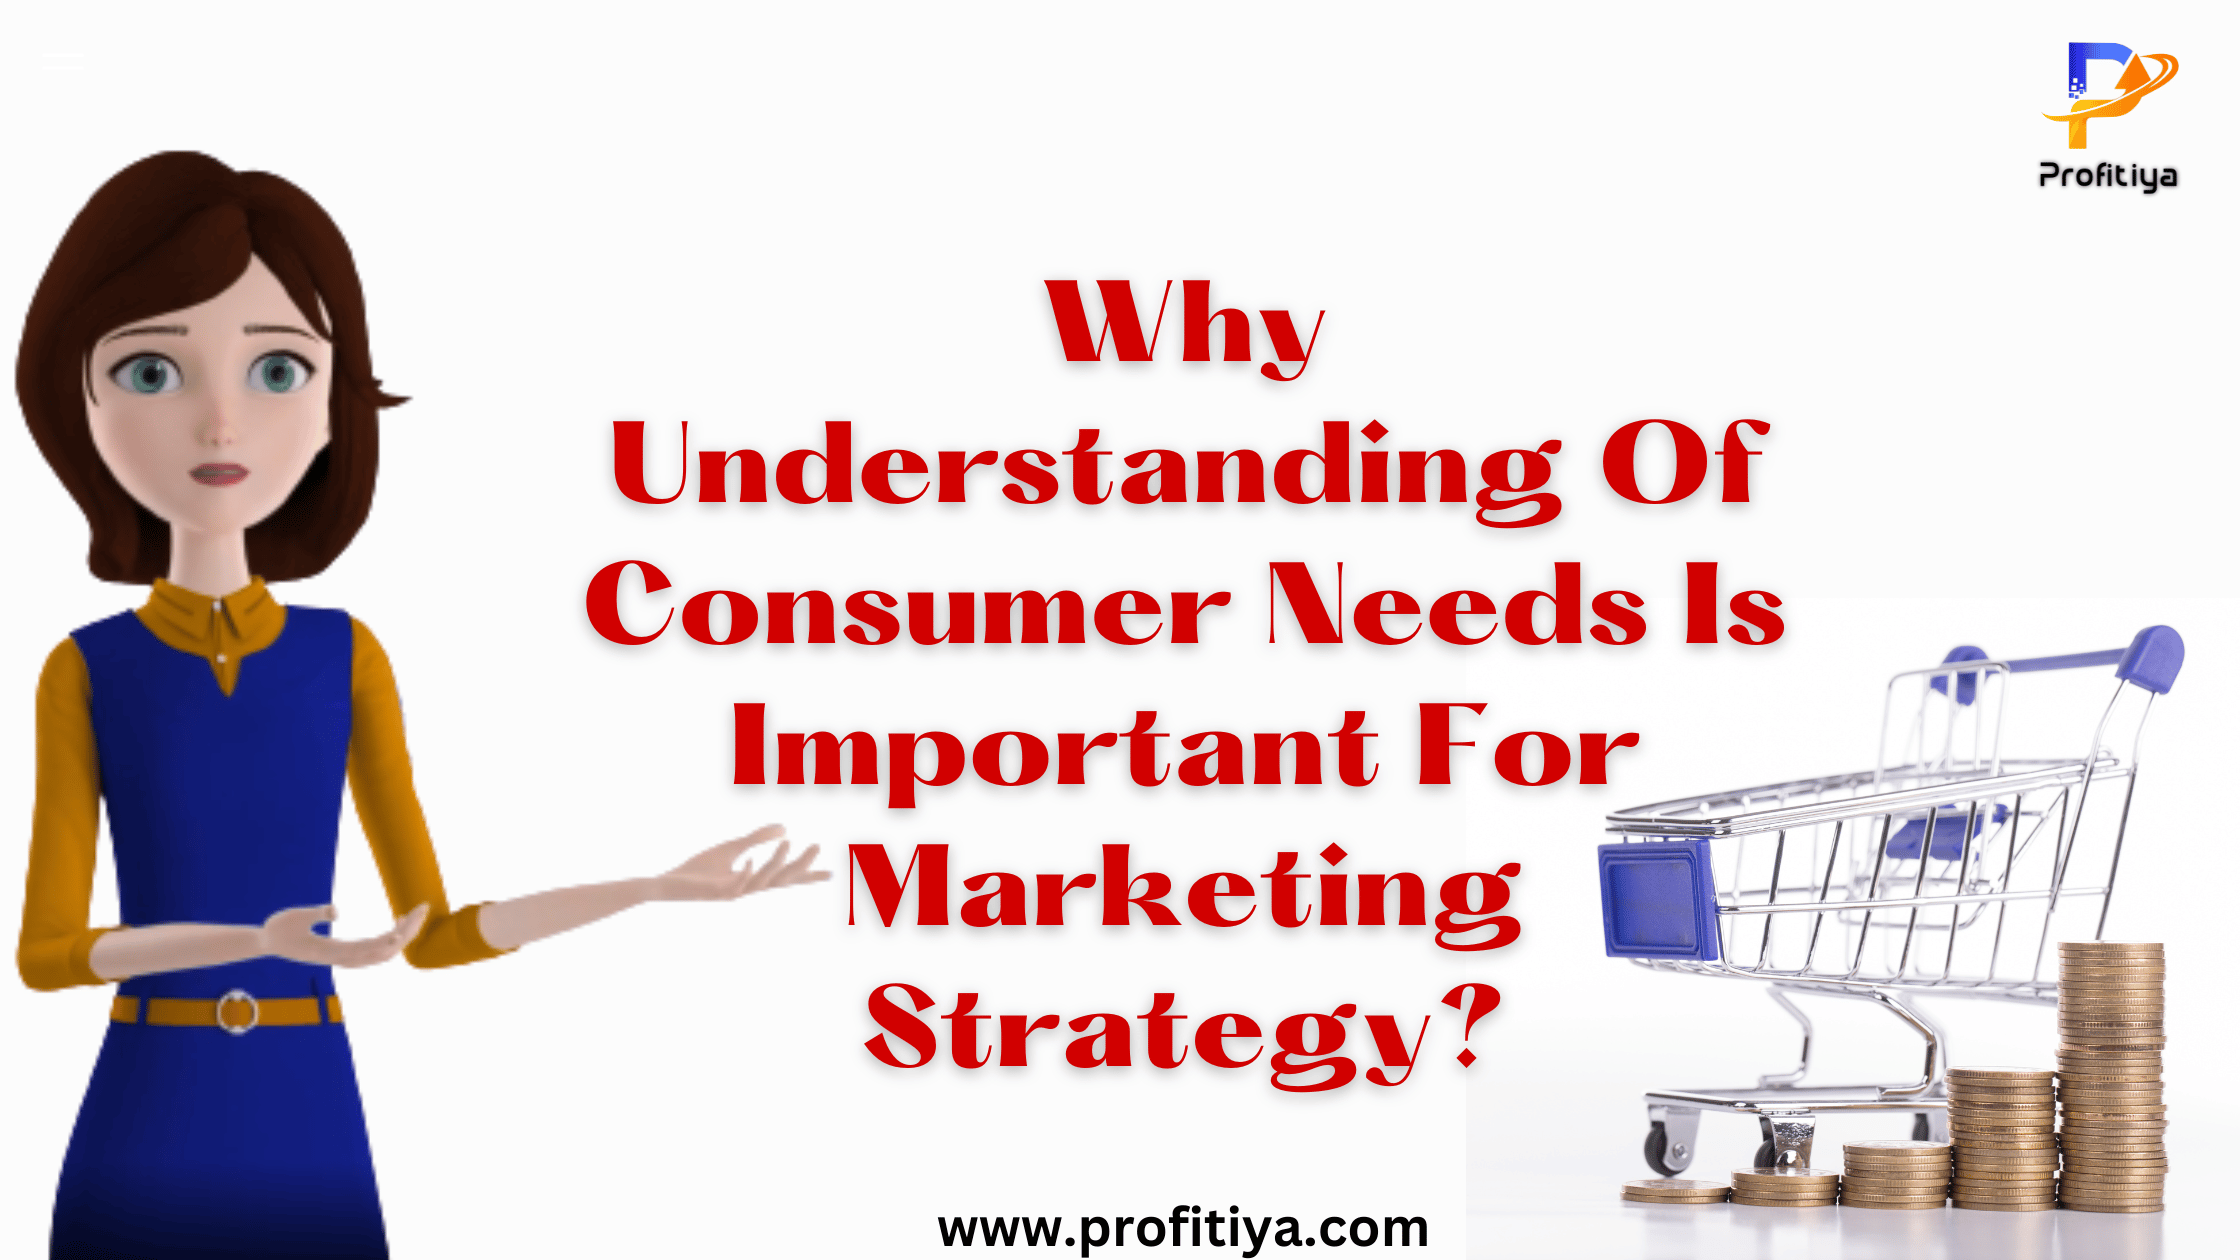 Why Understanding Of Consumer Needs Is Important For Marketing Strategy